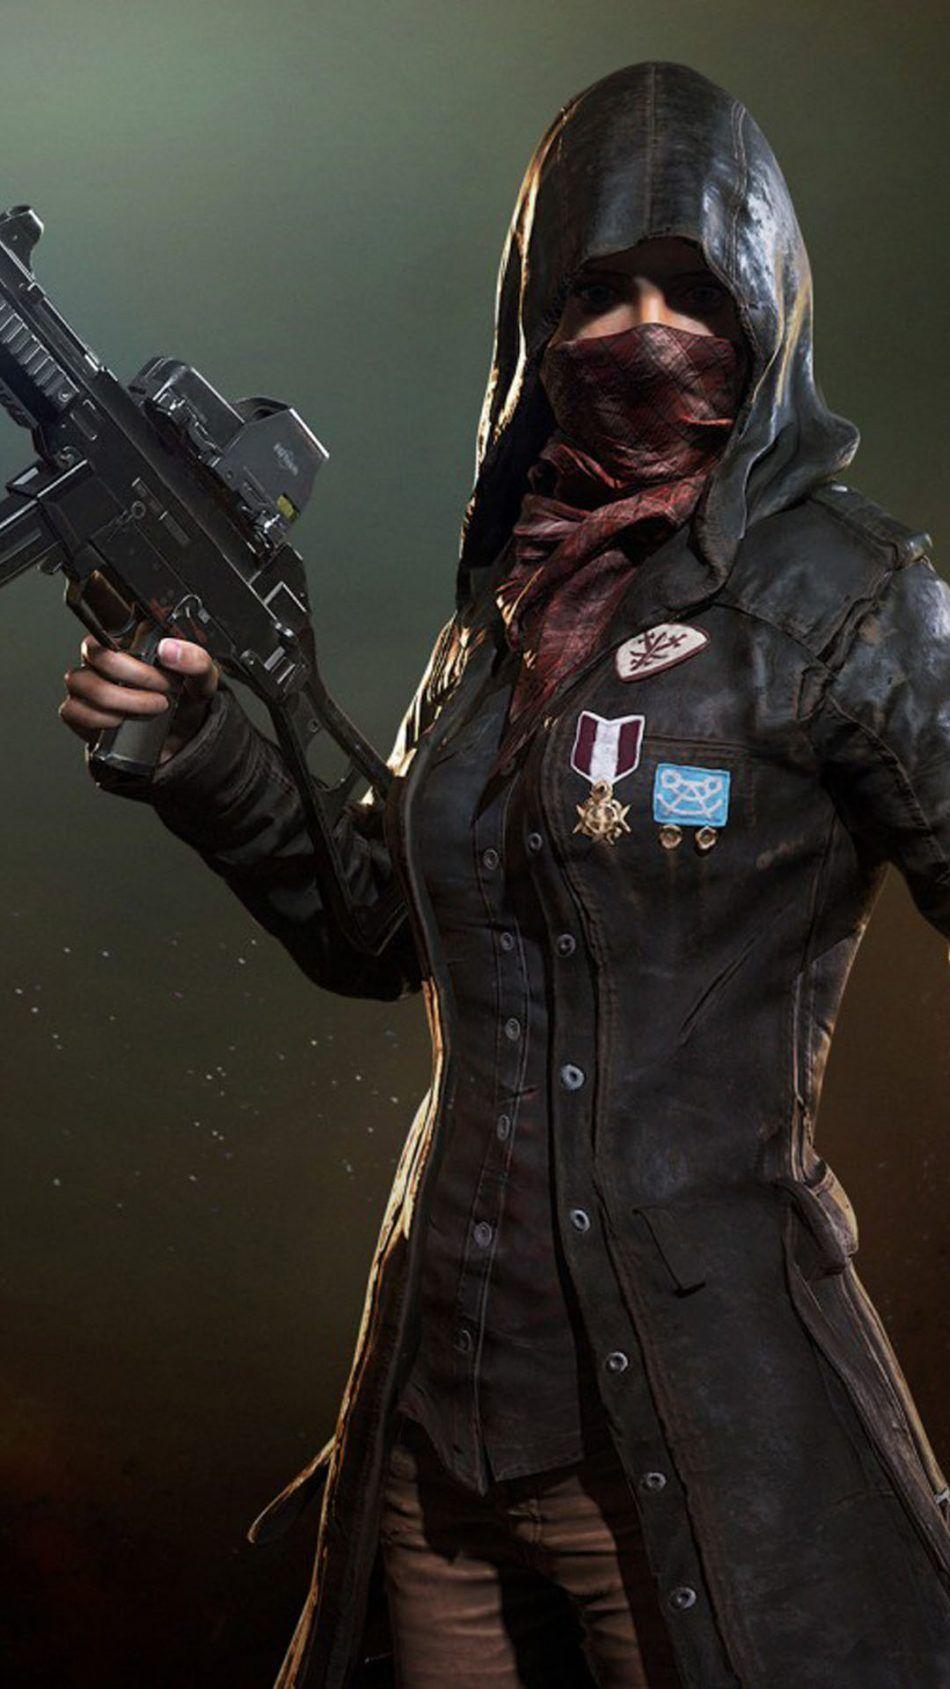 PUBG Female Player In Mask. Blue wallpaper iphone, Best iphone